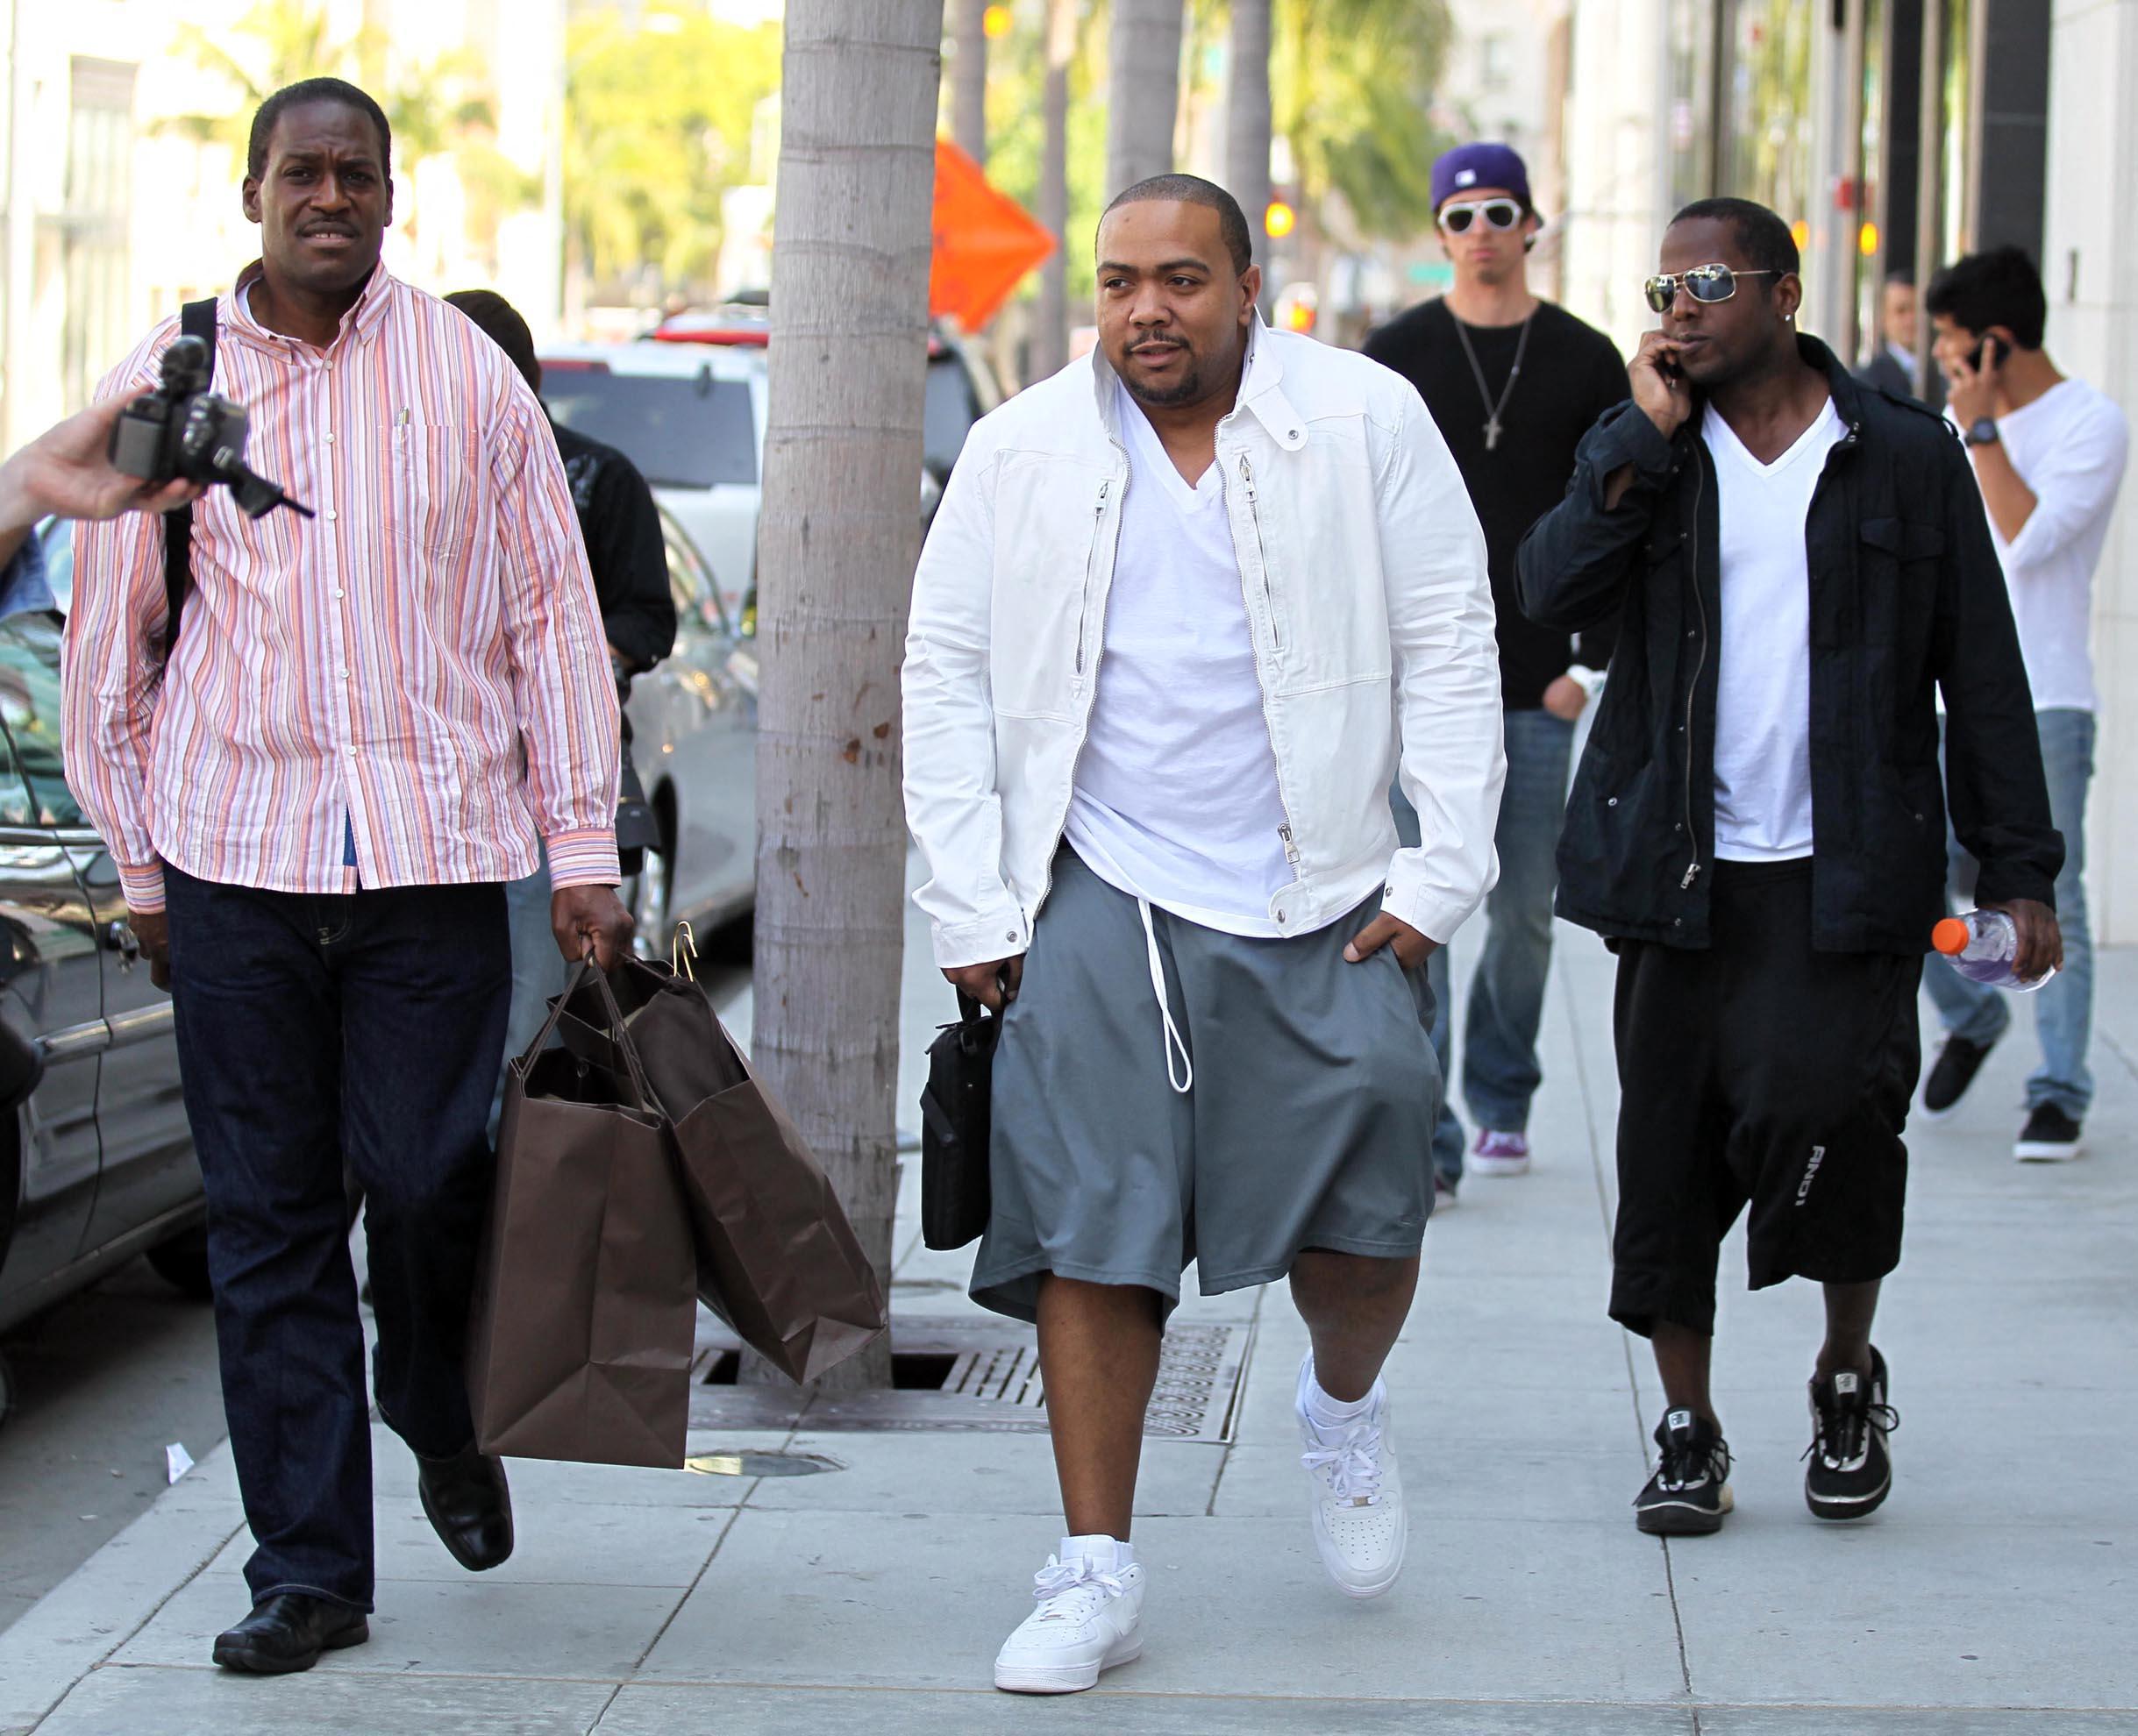 TIMBALAND AND HIS FRIENDS SHOPPING IN BEVERLY HILLS